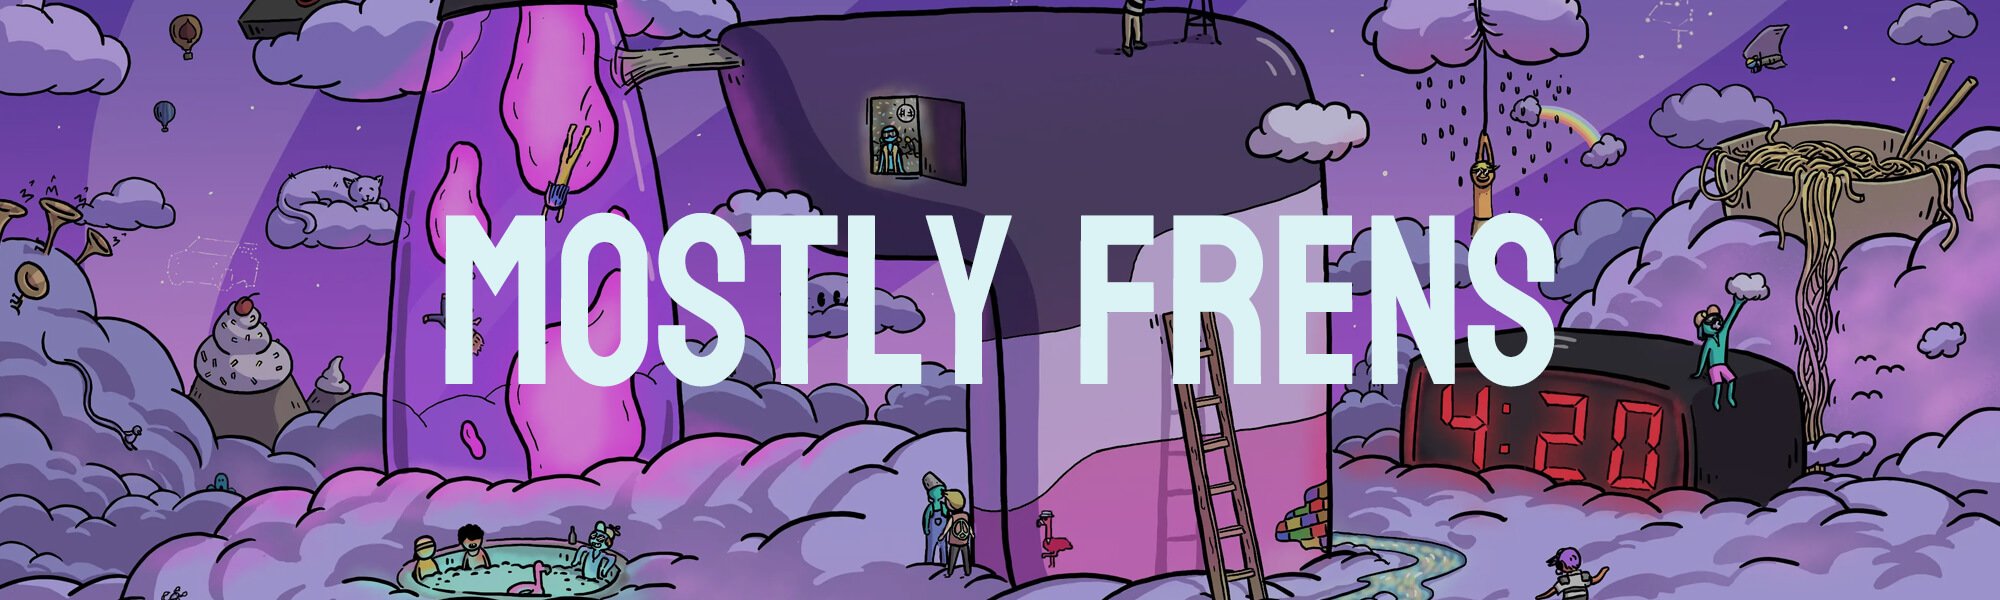 Mostly Frens banner